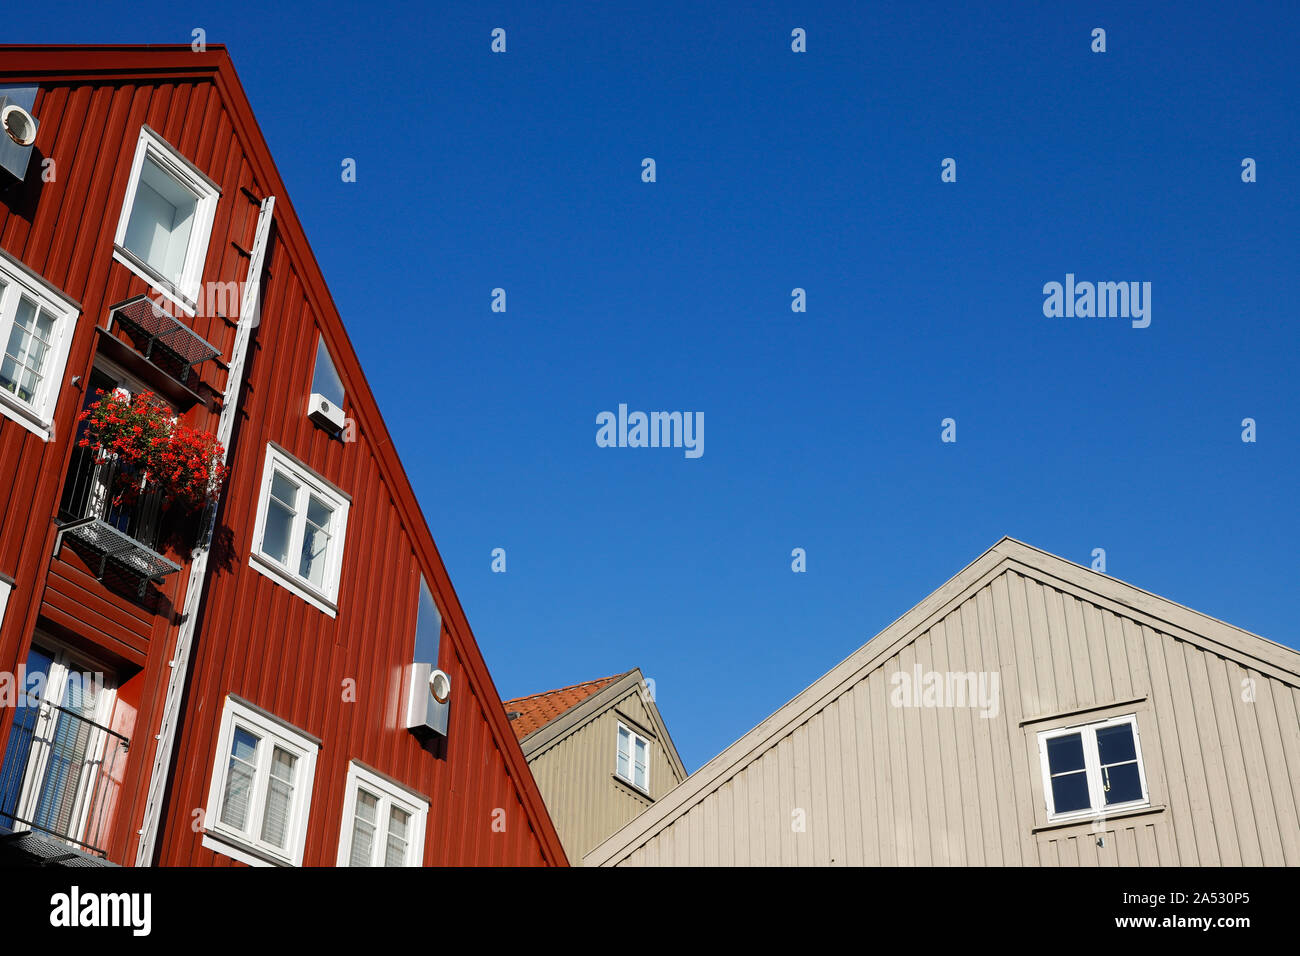 Partial view of multi story modern apartment buildings with a wooden facade. Stock Photo